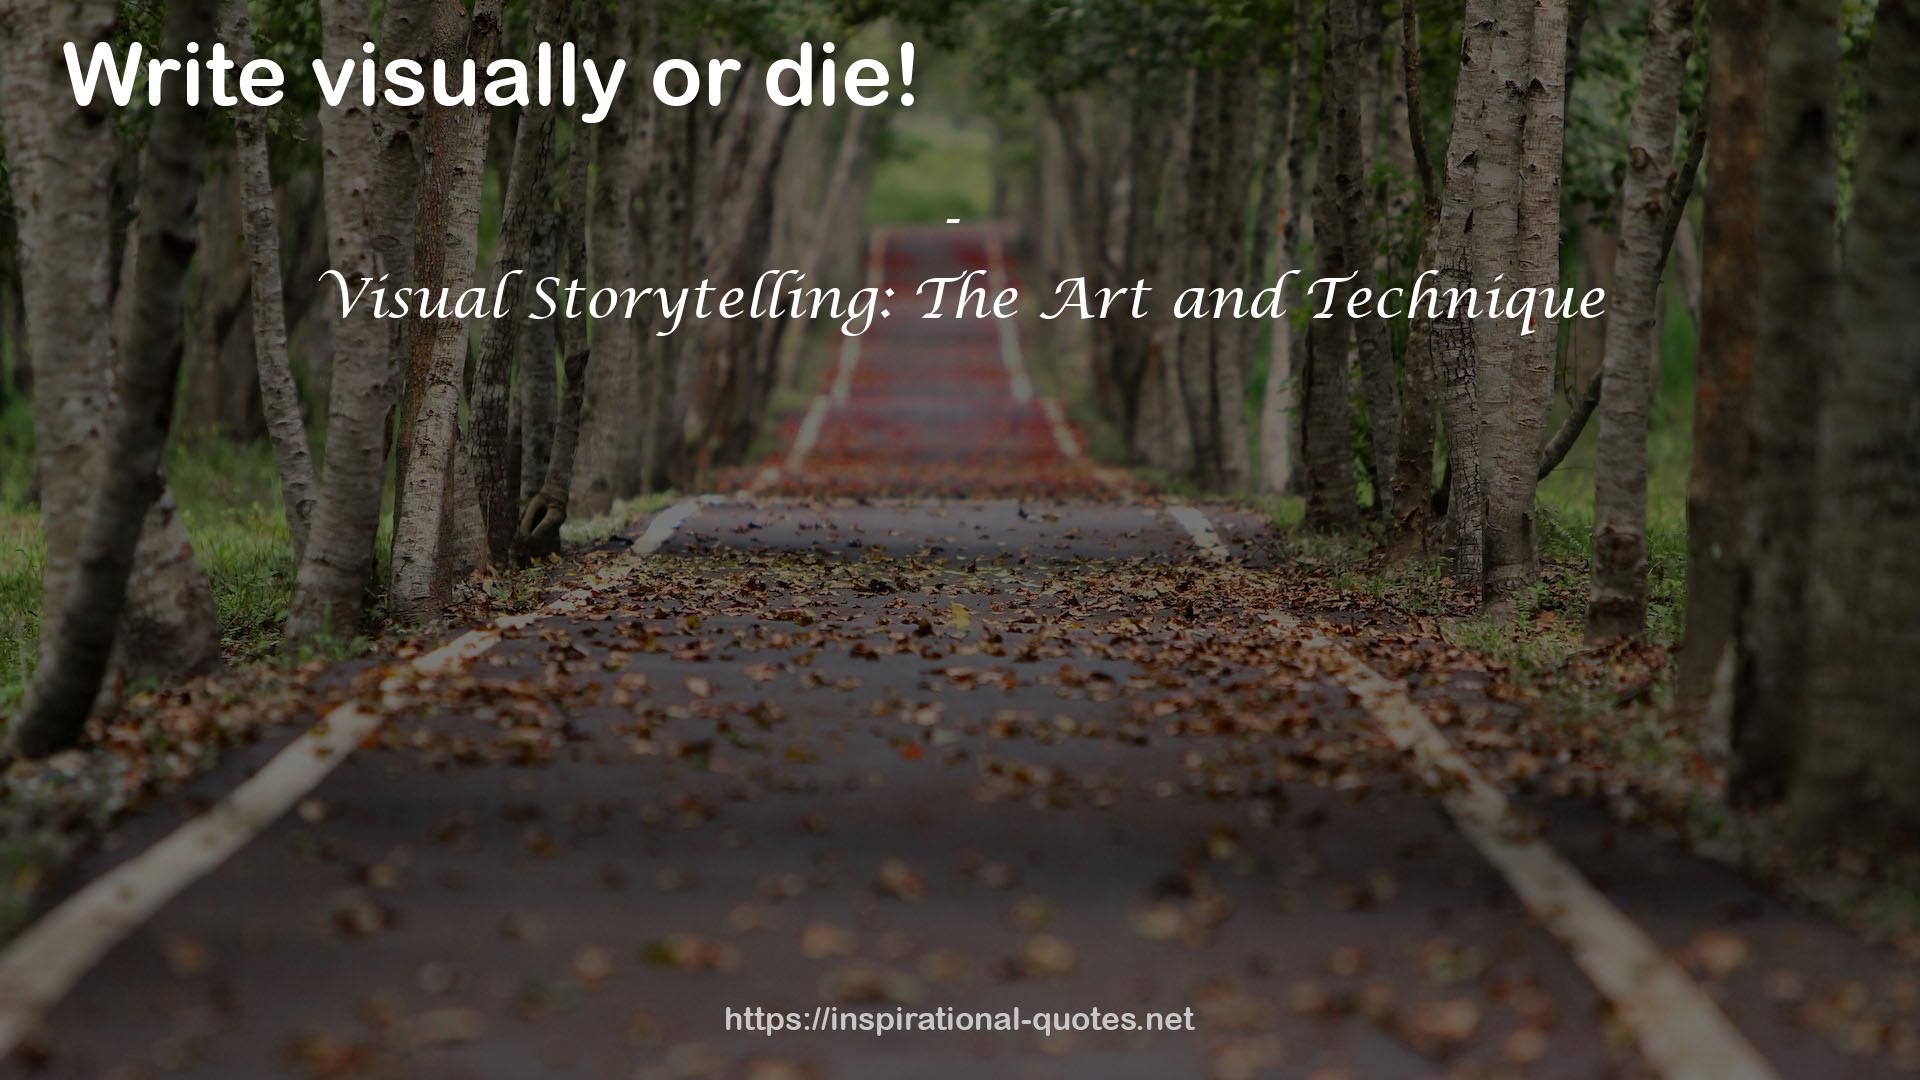 Visual Storytelling: The Art and Technique QUOTES